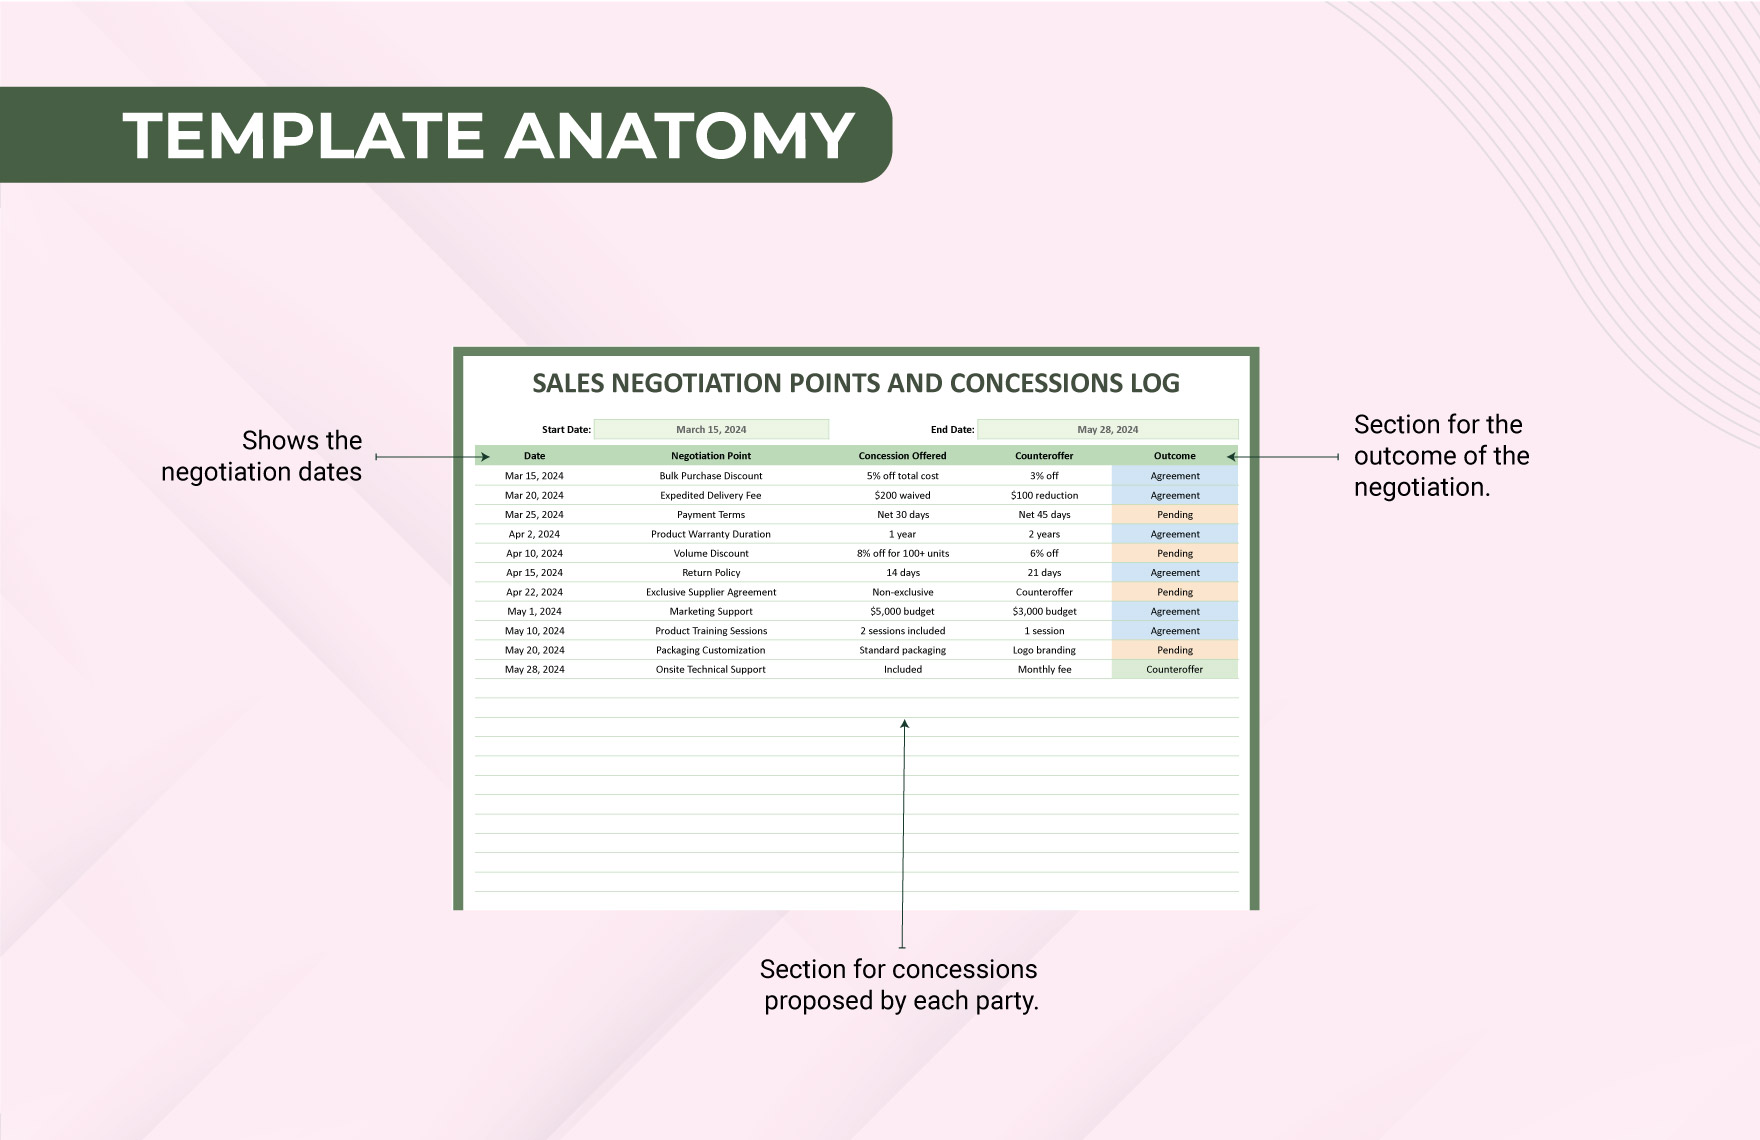 Sales Negotiation Points and Concessions Log Template